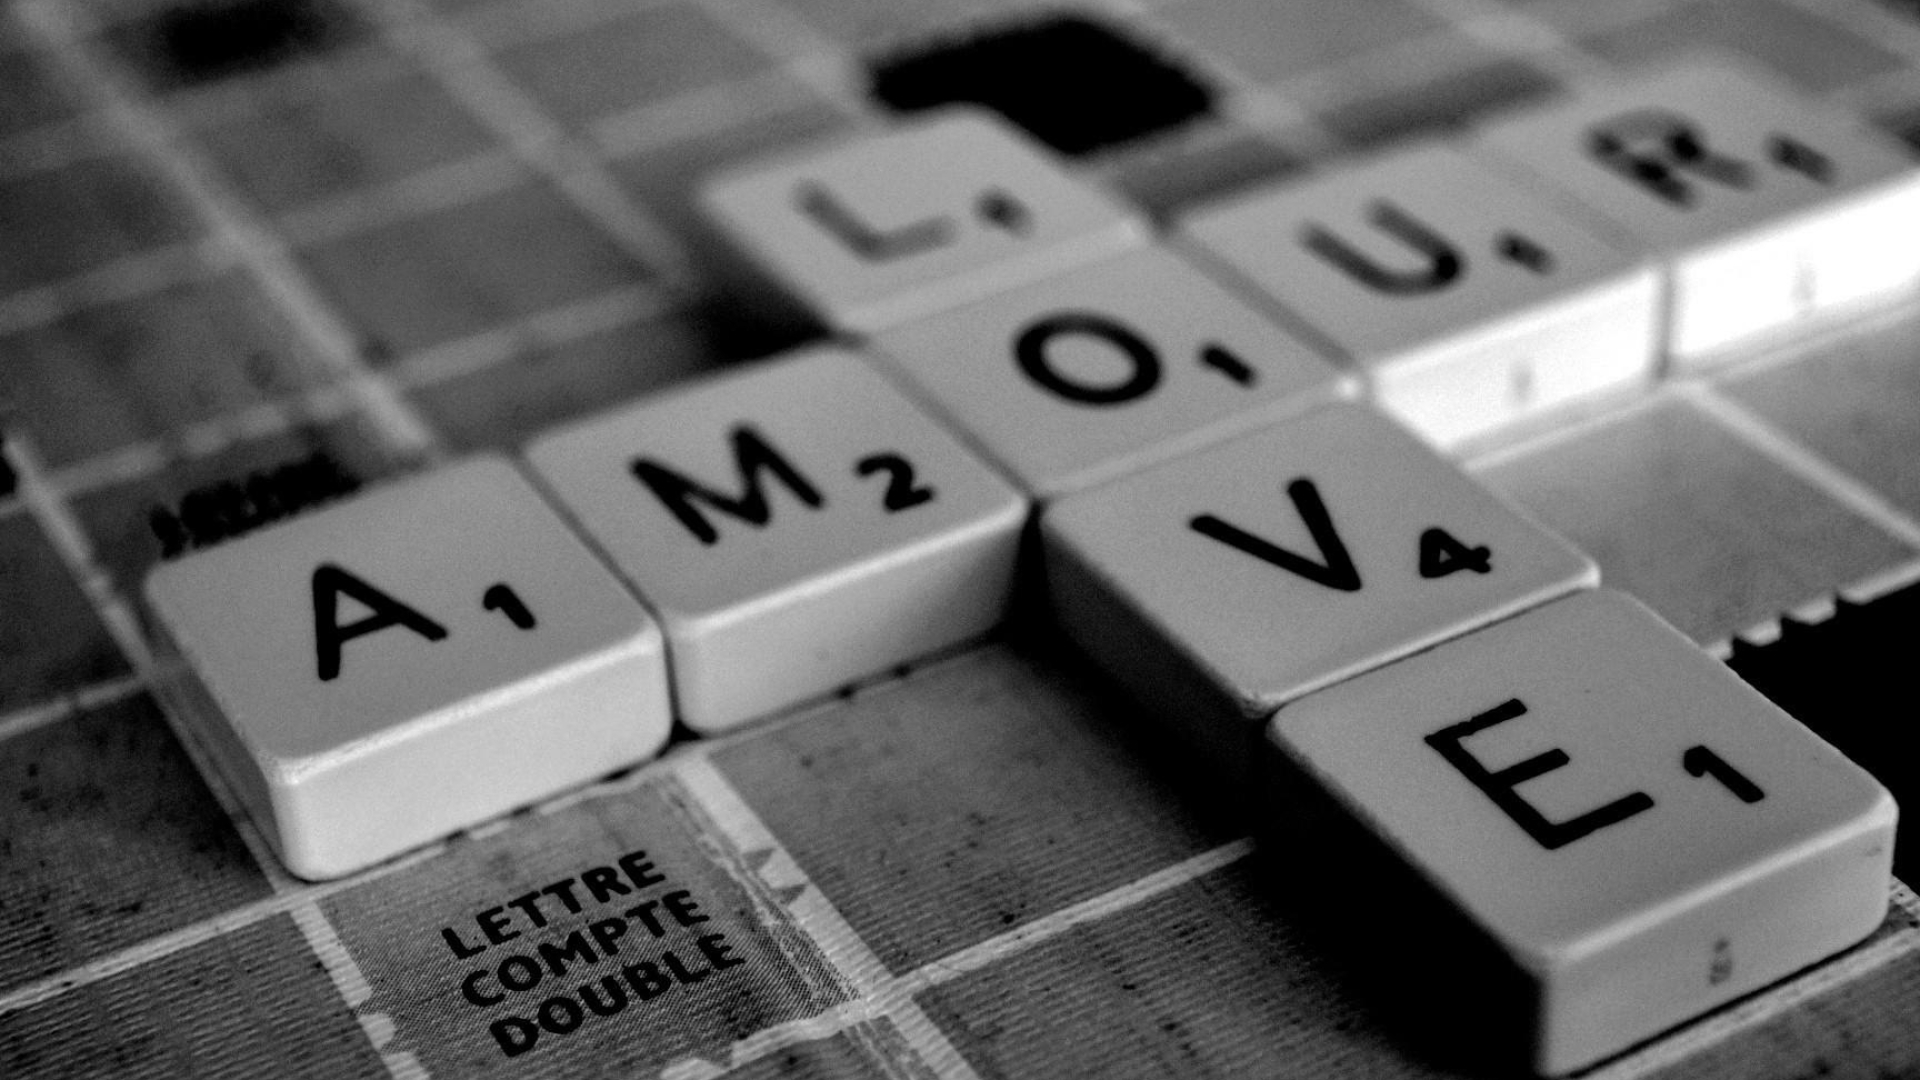 Scrabble: Love, The great feeling spelled out in the French version of a family competitive game. 1920x1080 Full HD Wallpaper.